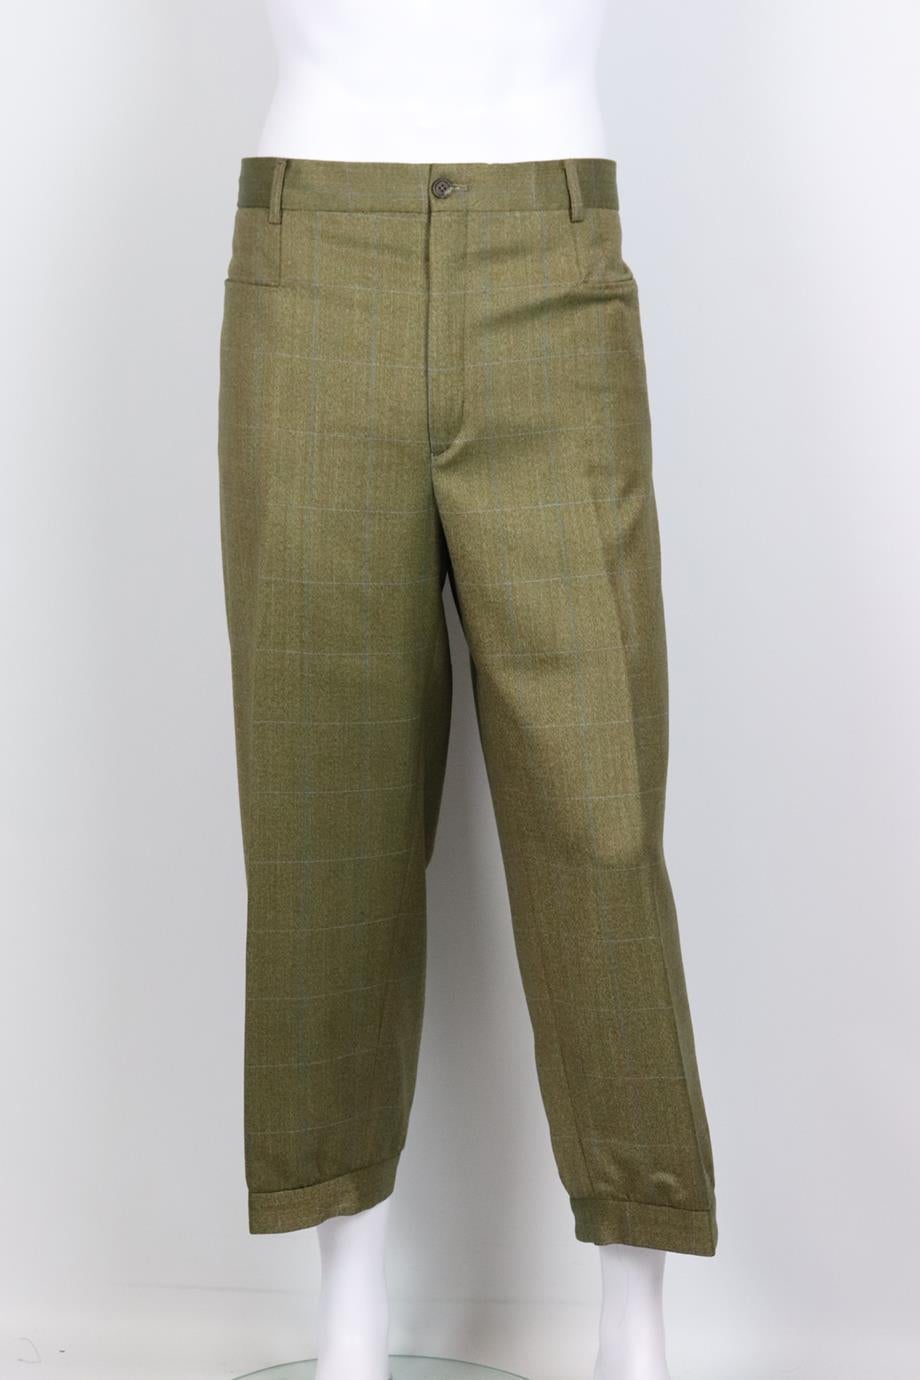 Purdey men's checked wool blend tweed pants. Green and red. Button and zip fastening at front. 100% Wool; lining: 100% viscose. Size: XXLarge (IT 54, EU 54, UK/US Waist 38). Waist: 39.5 in. Hips: 46 in. Length: 34.6 in. Inseam: 24.5 in. Rise: 12.25